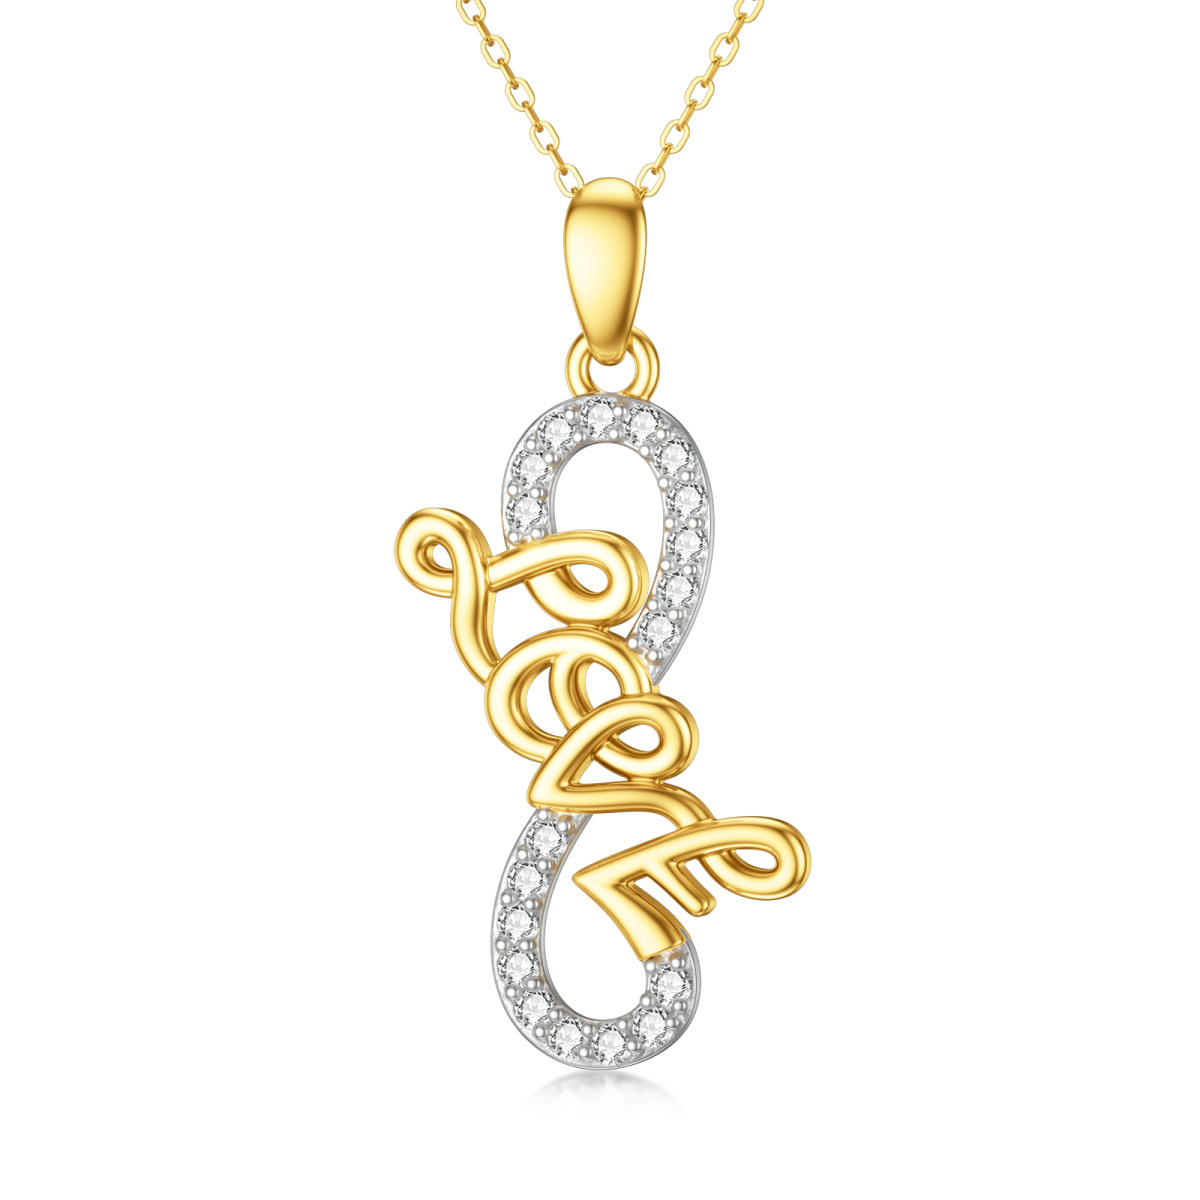 14K White Gold & Yellow Gold Cubic Zirconia Infinite Symbol Pendant Necklace with Engraved Word-1